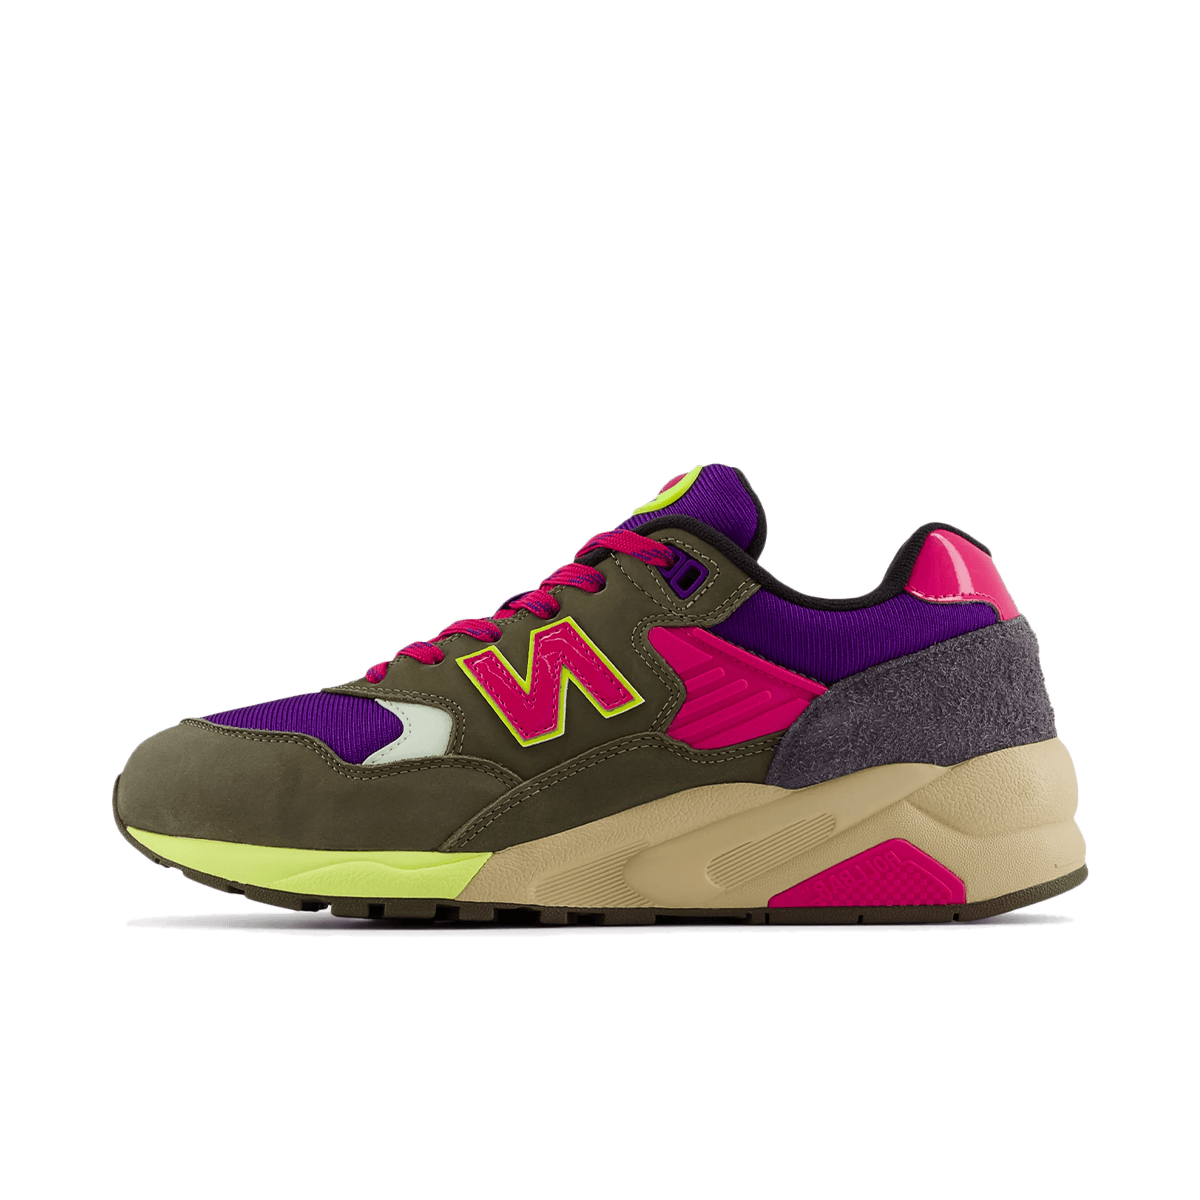 New Balance 580 'Olive & Pink' - Patent Pack